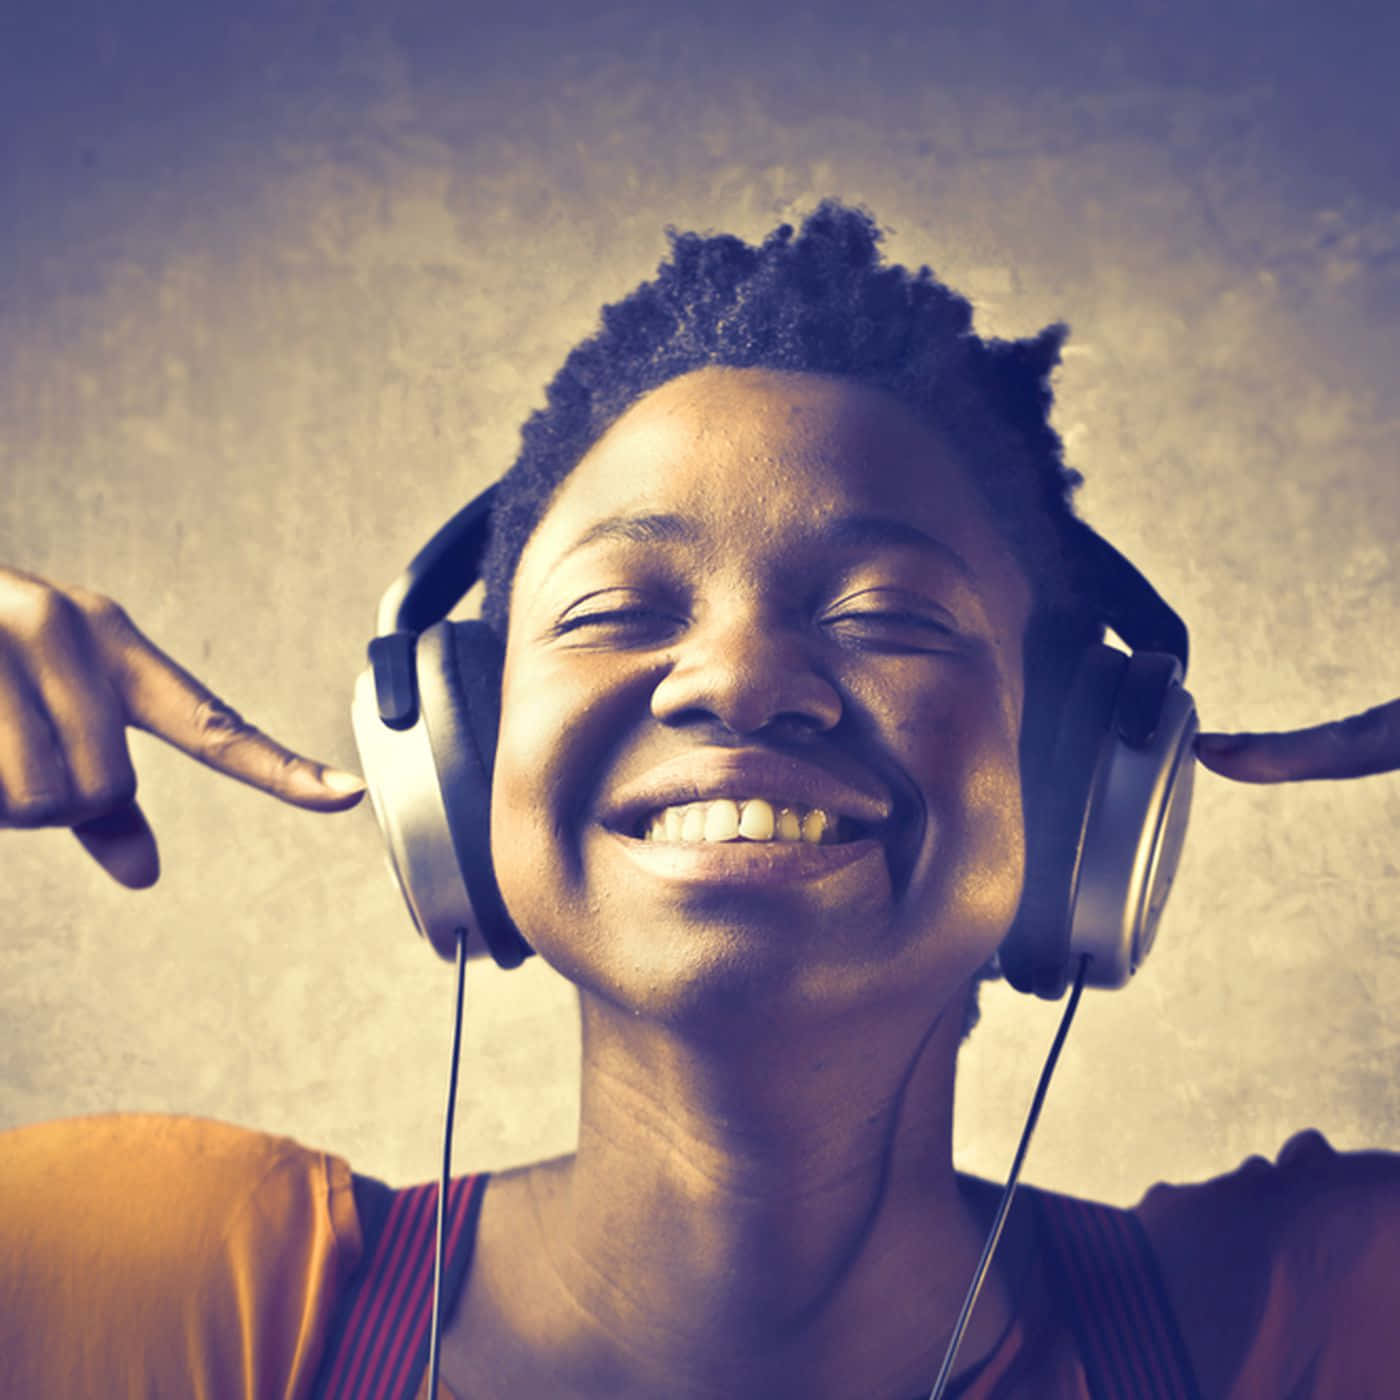 A Woman Wearing Headphones Is Pointing Her Fingers